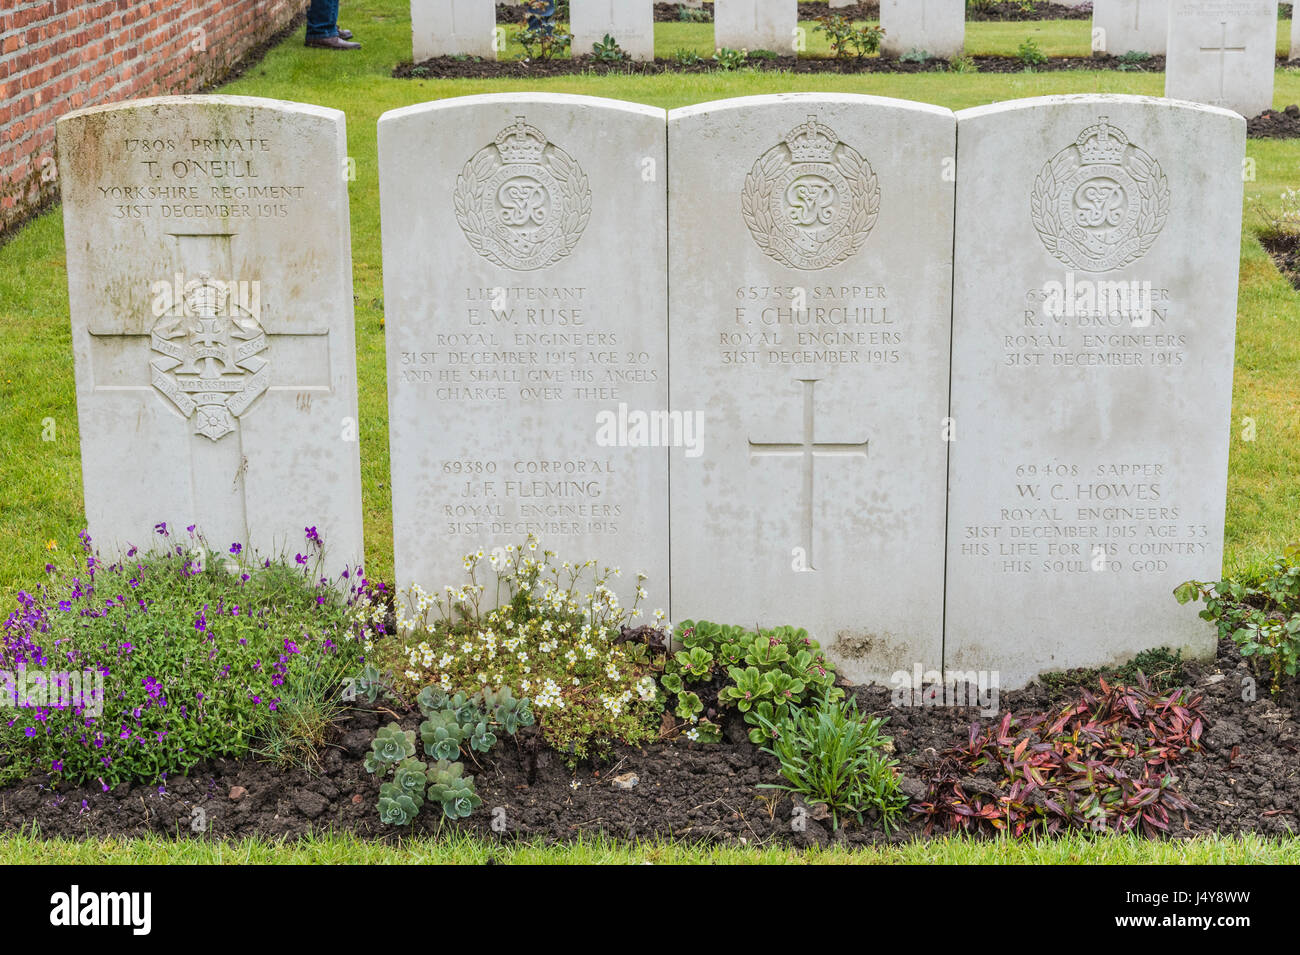 Erquinghem Military Cemetery on the Somme Battlefield of Northern France Stock Photo